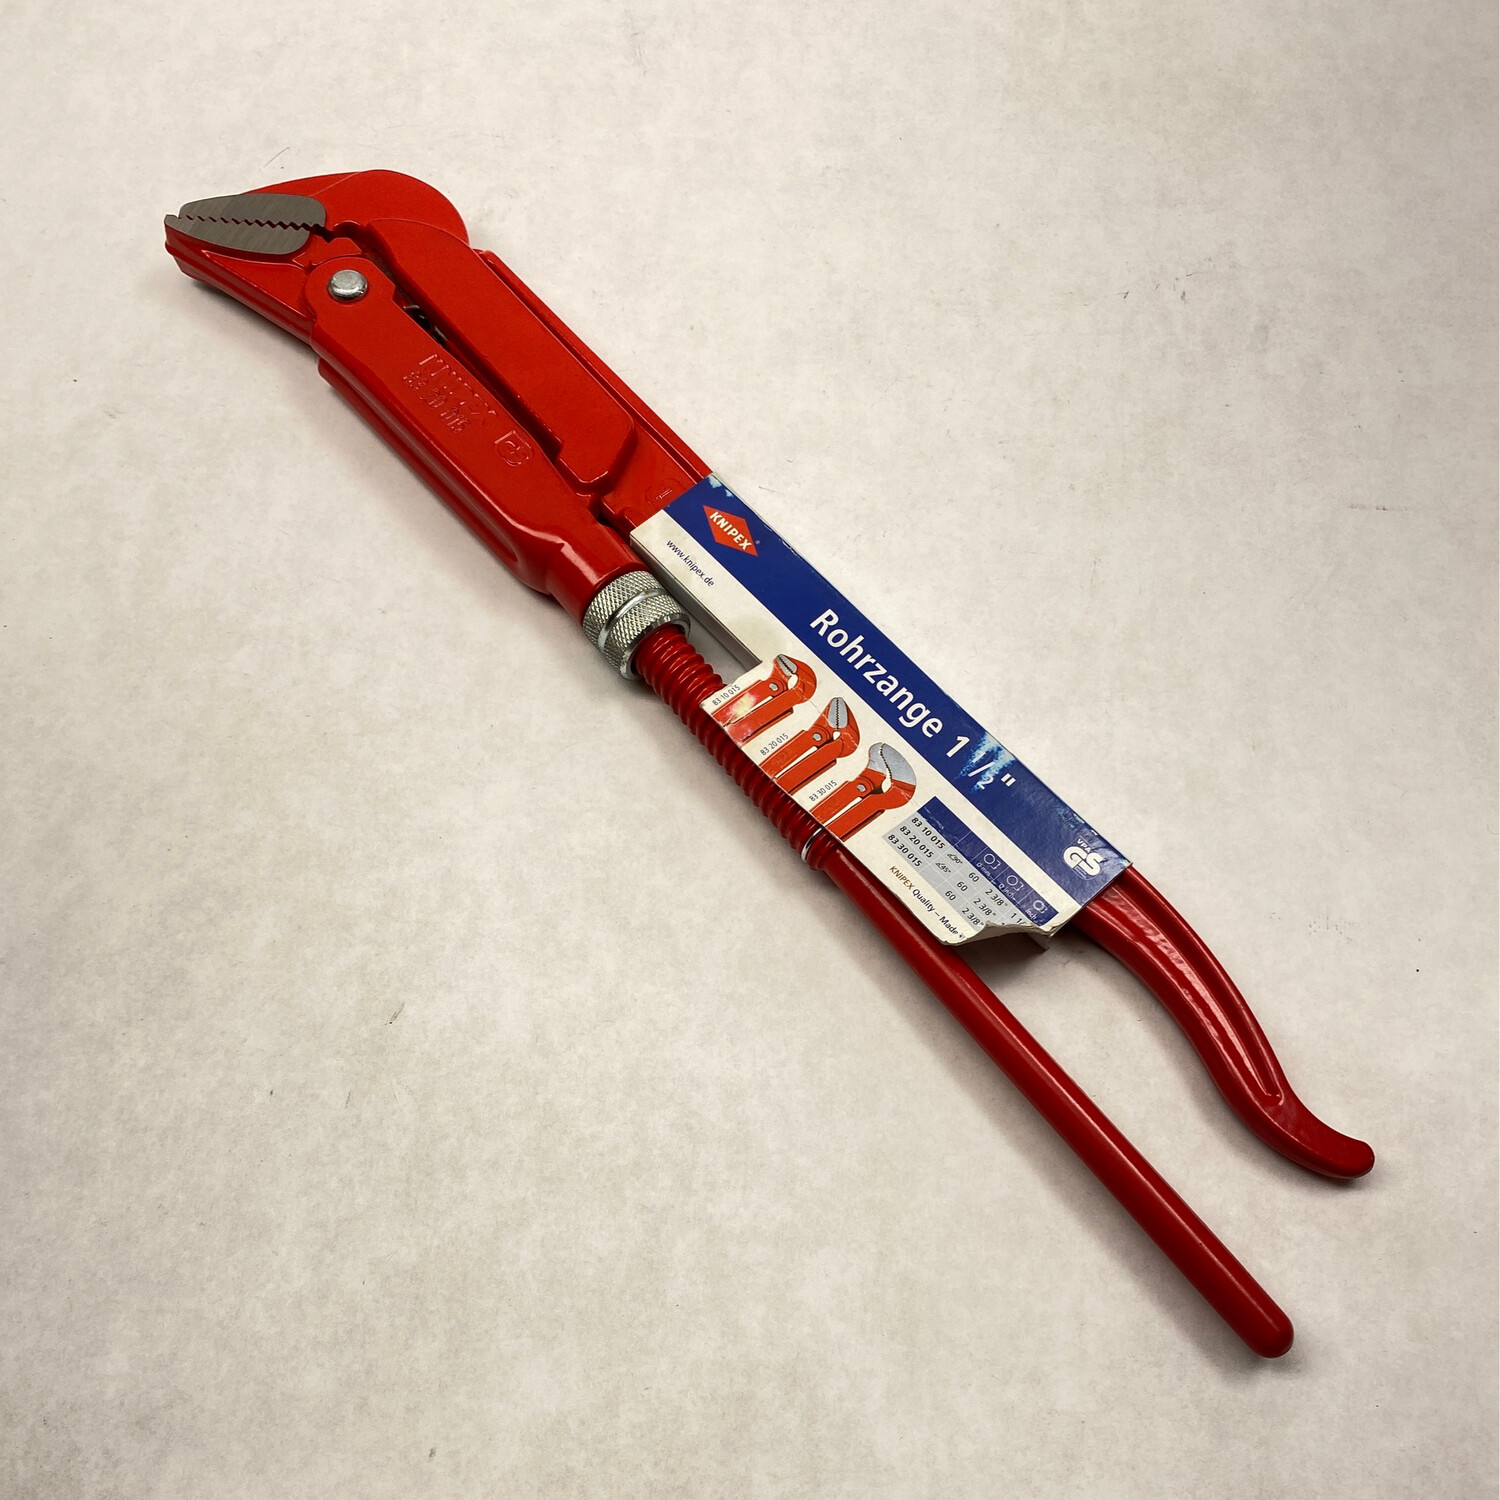 Knipex 17” Pipe Wrench 45 Degree, 83-20-015